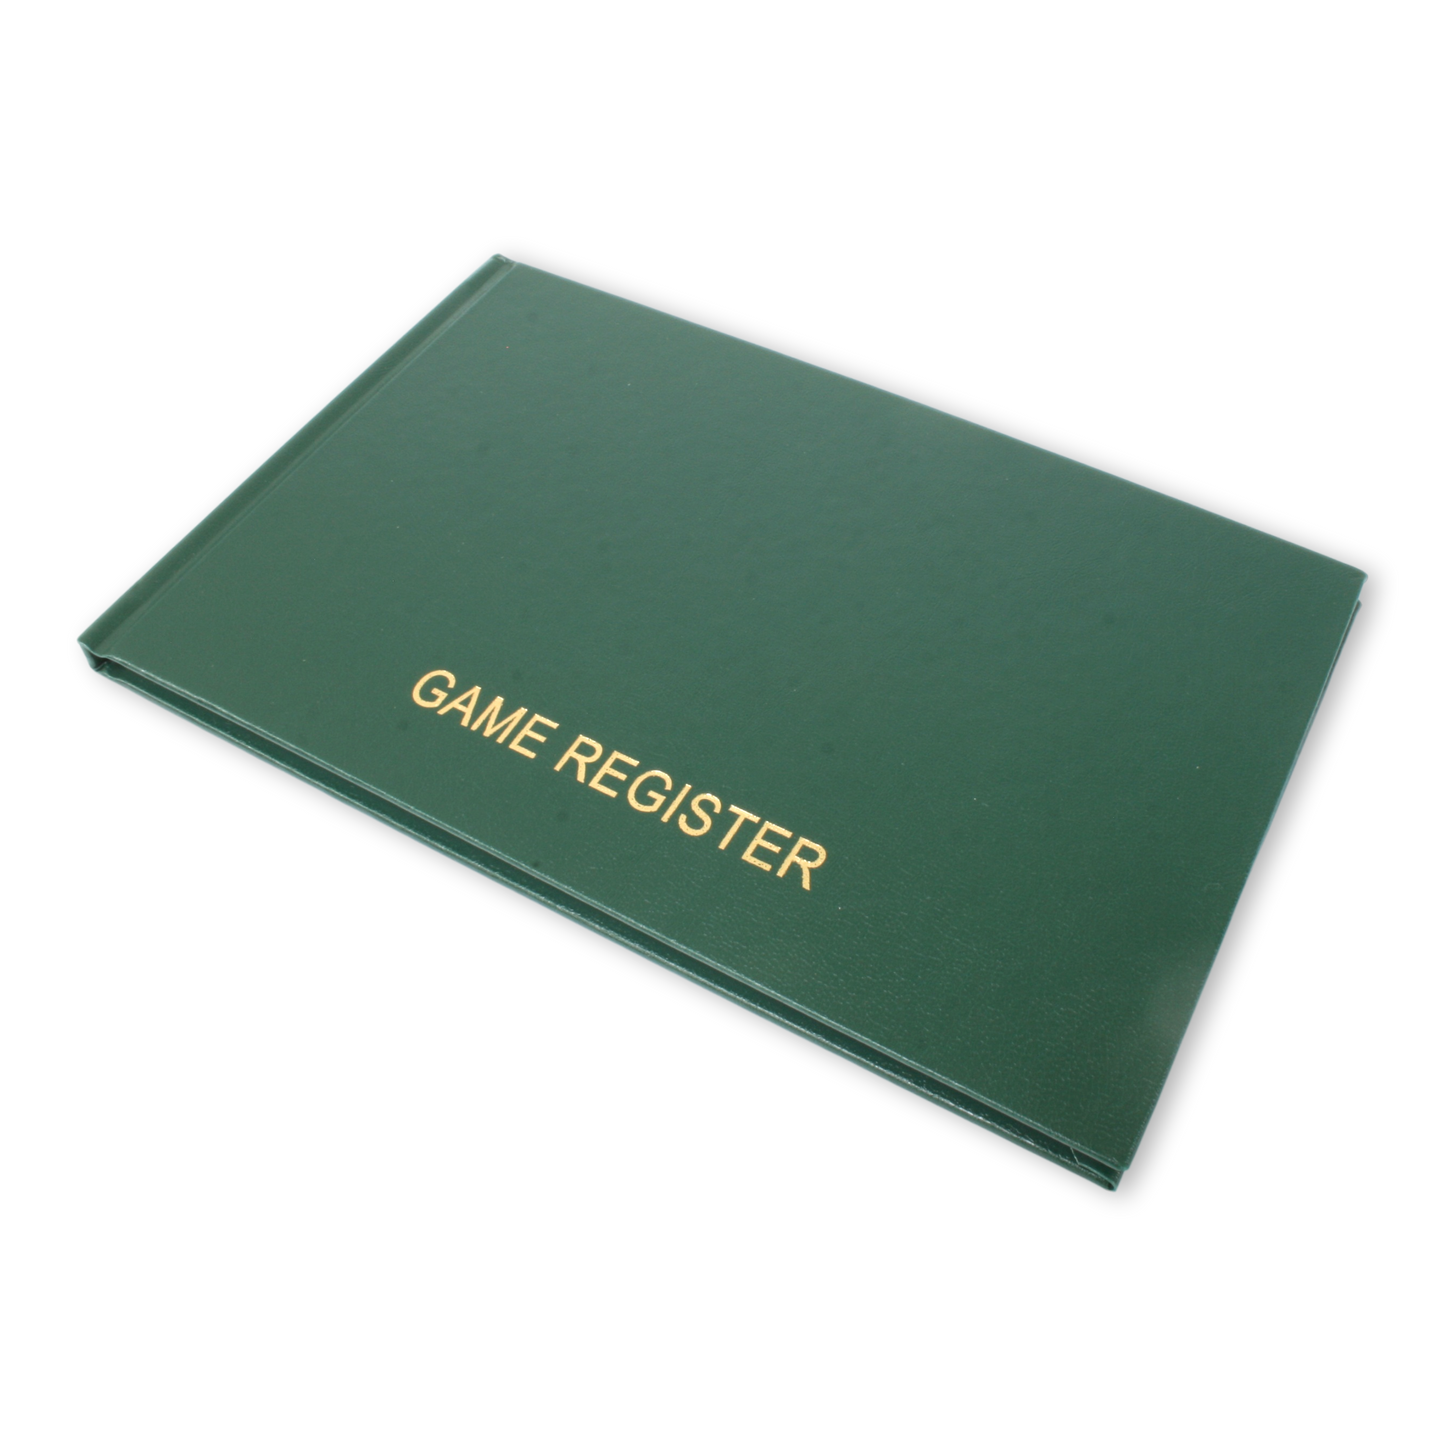 Game Register Record Book Shooting Journal Game Birds